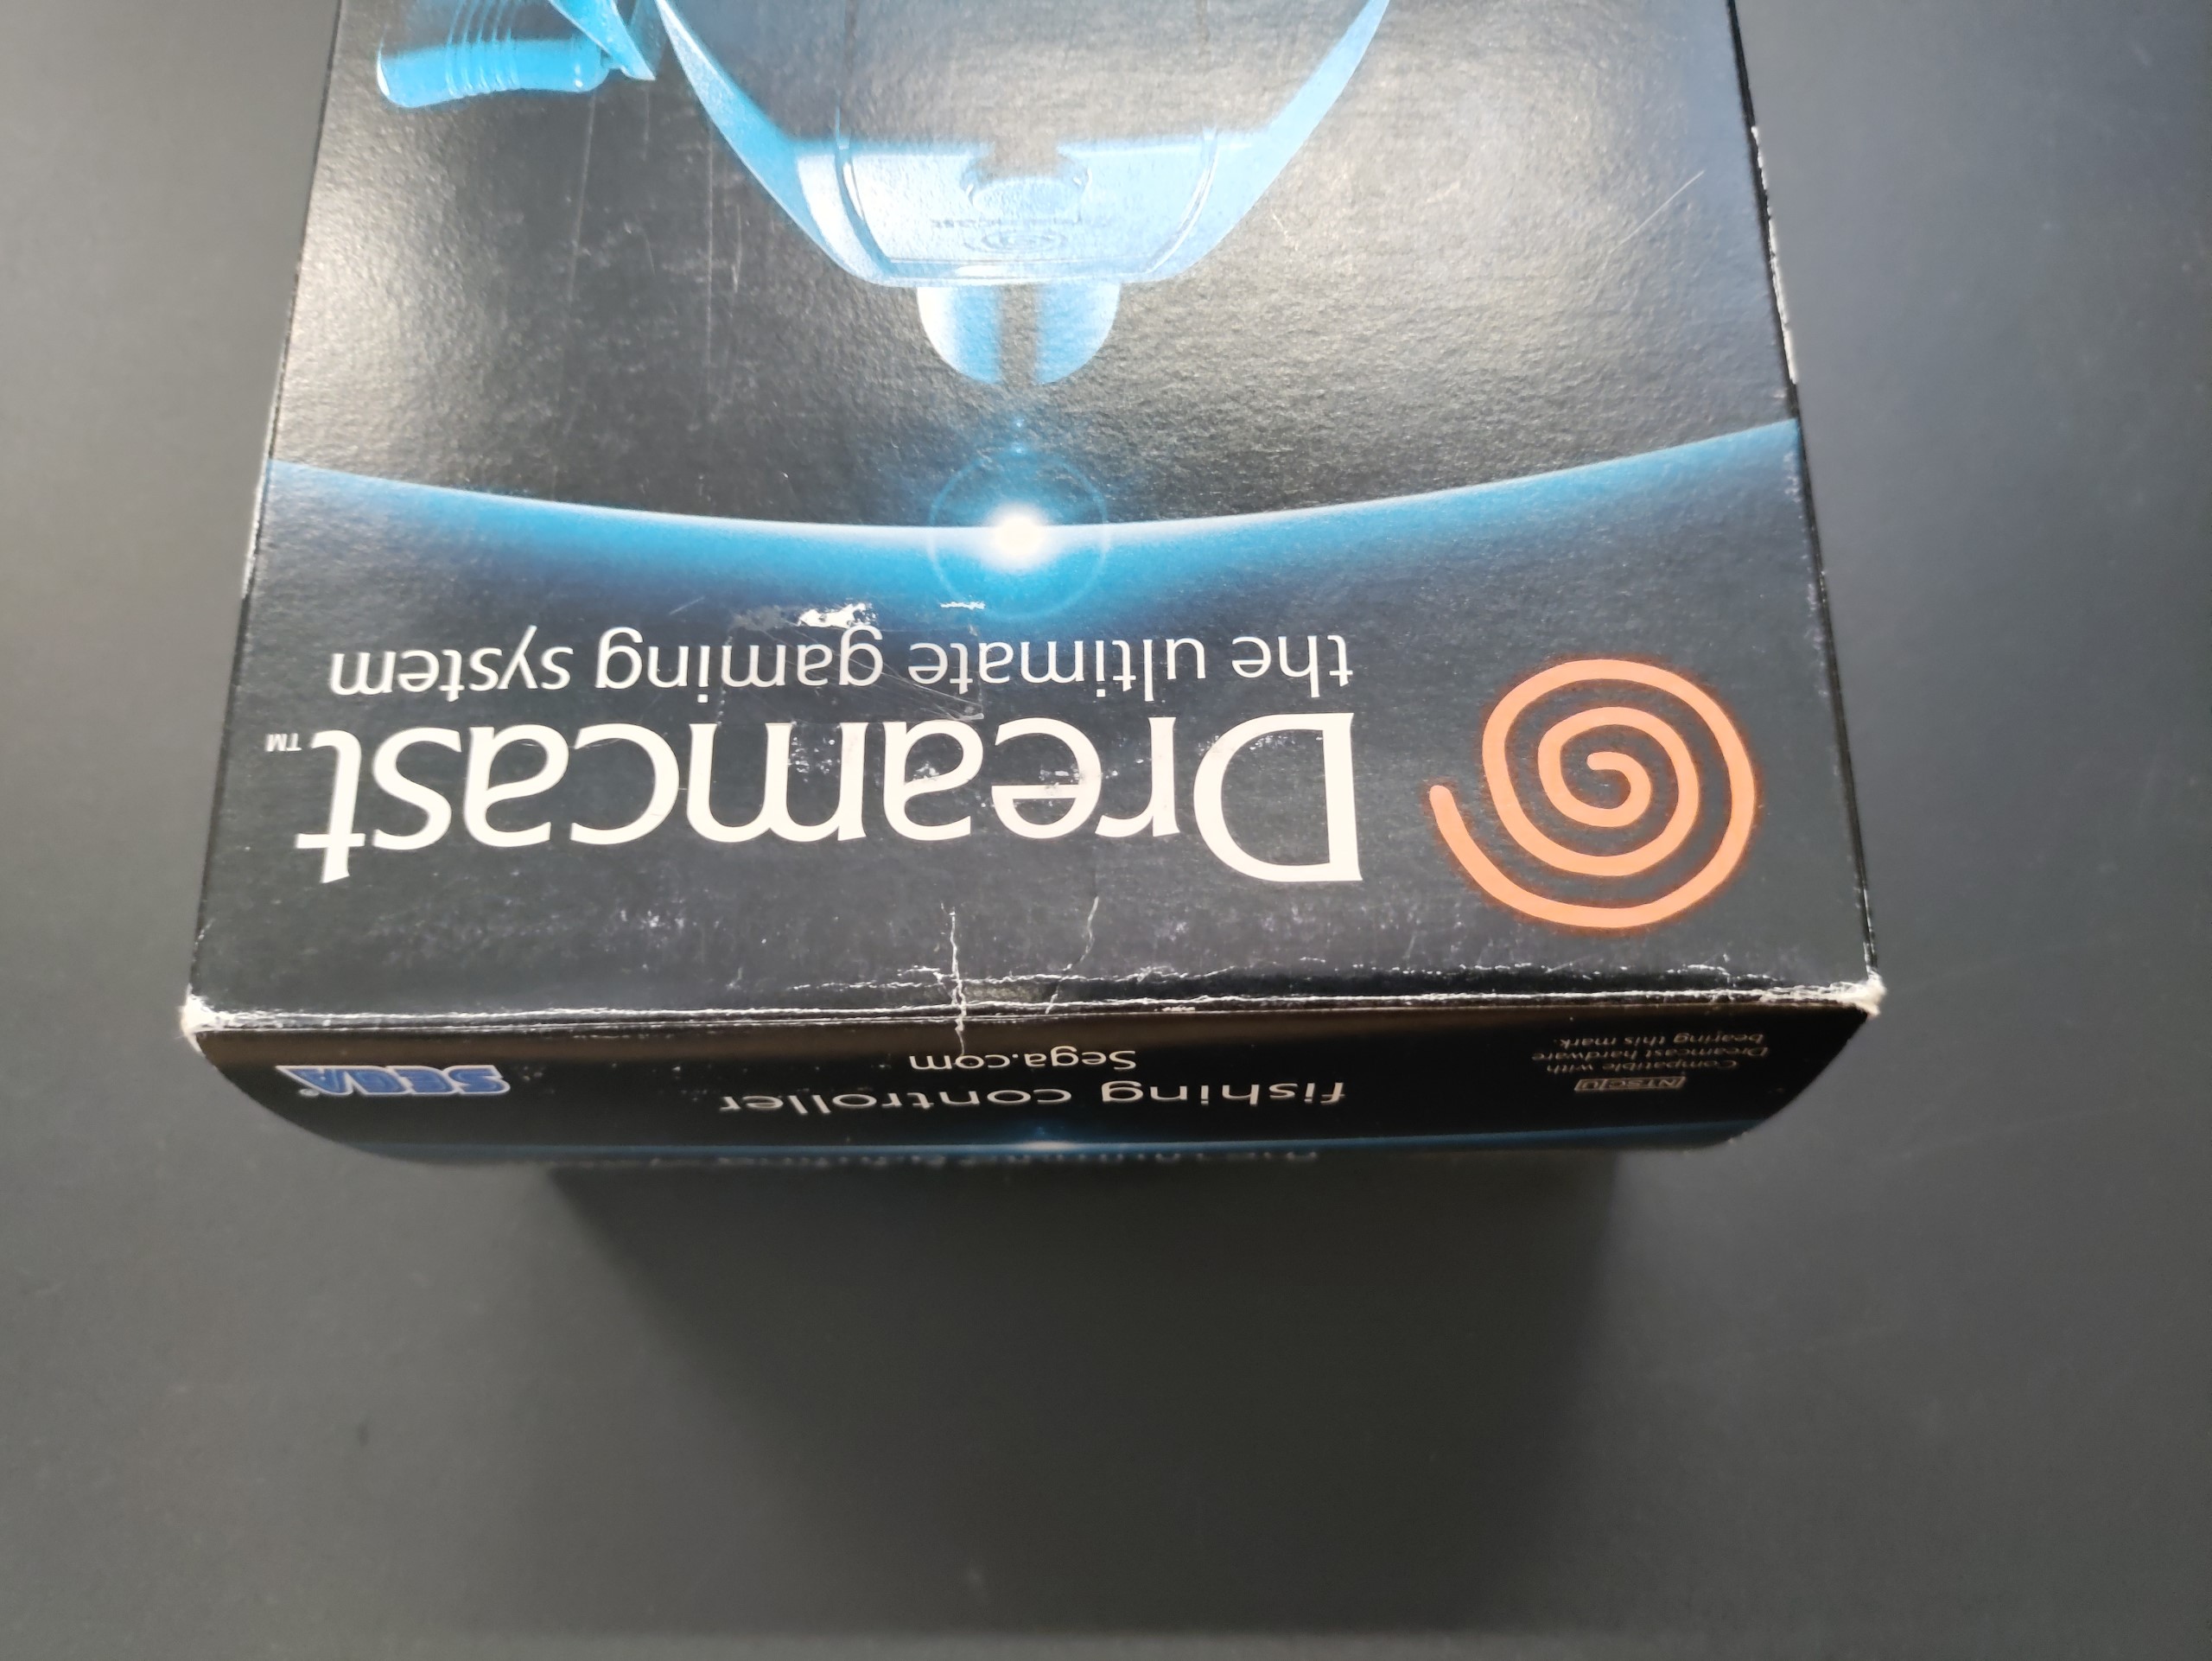 Dreamcast Fishing Rod Controller OVP